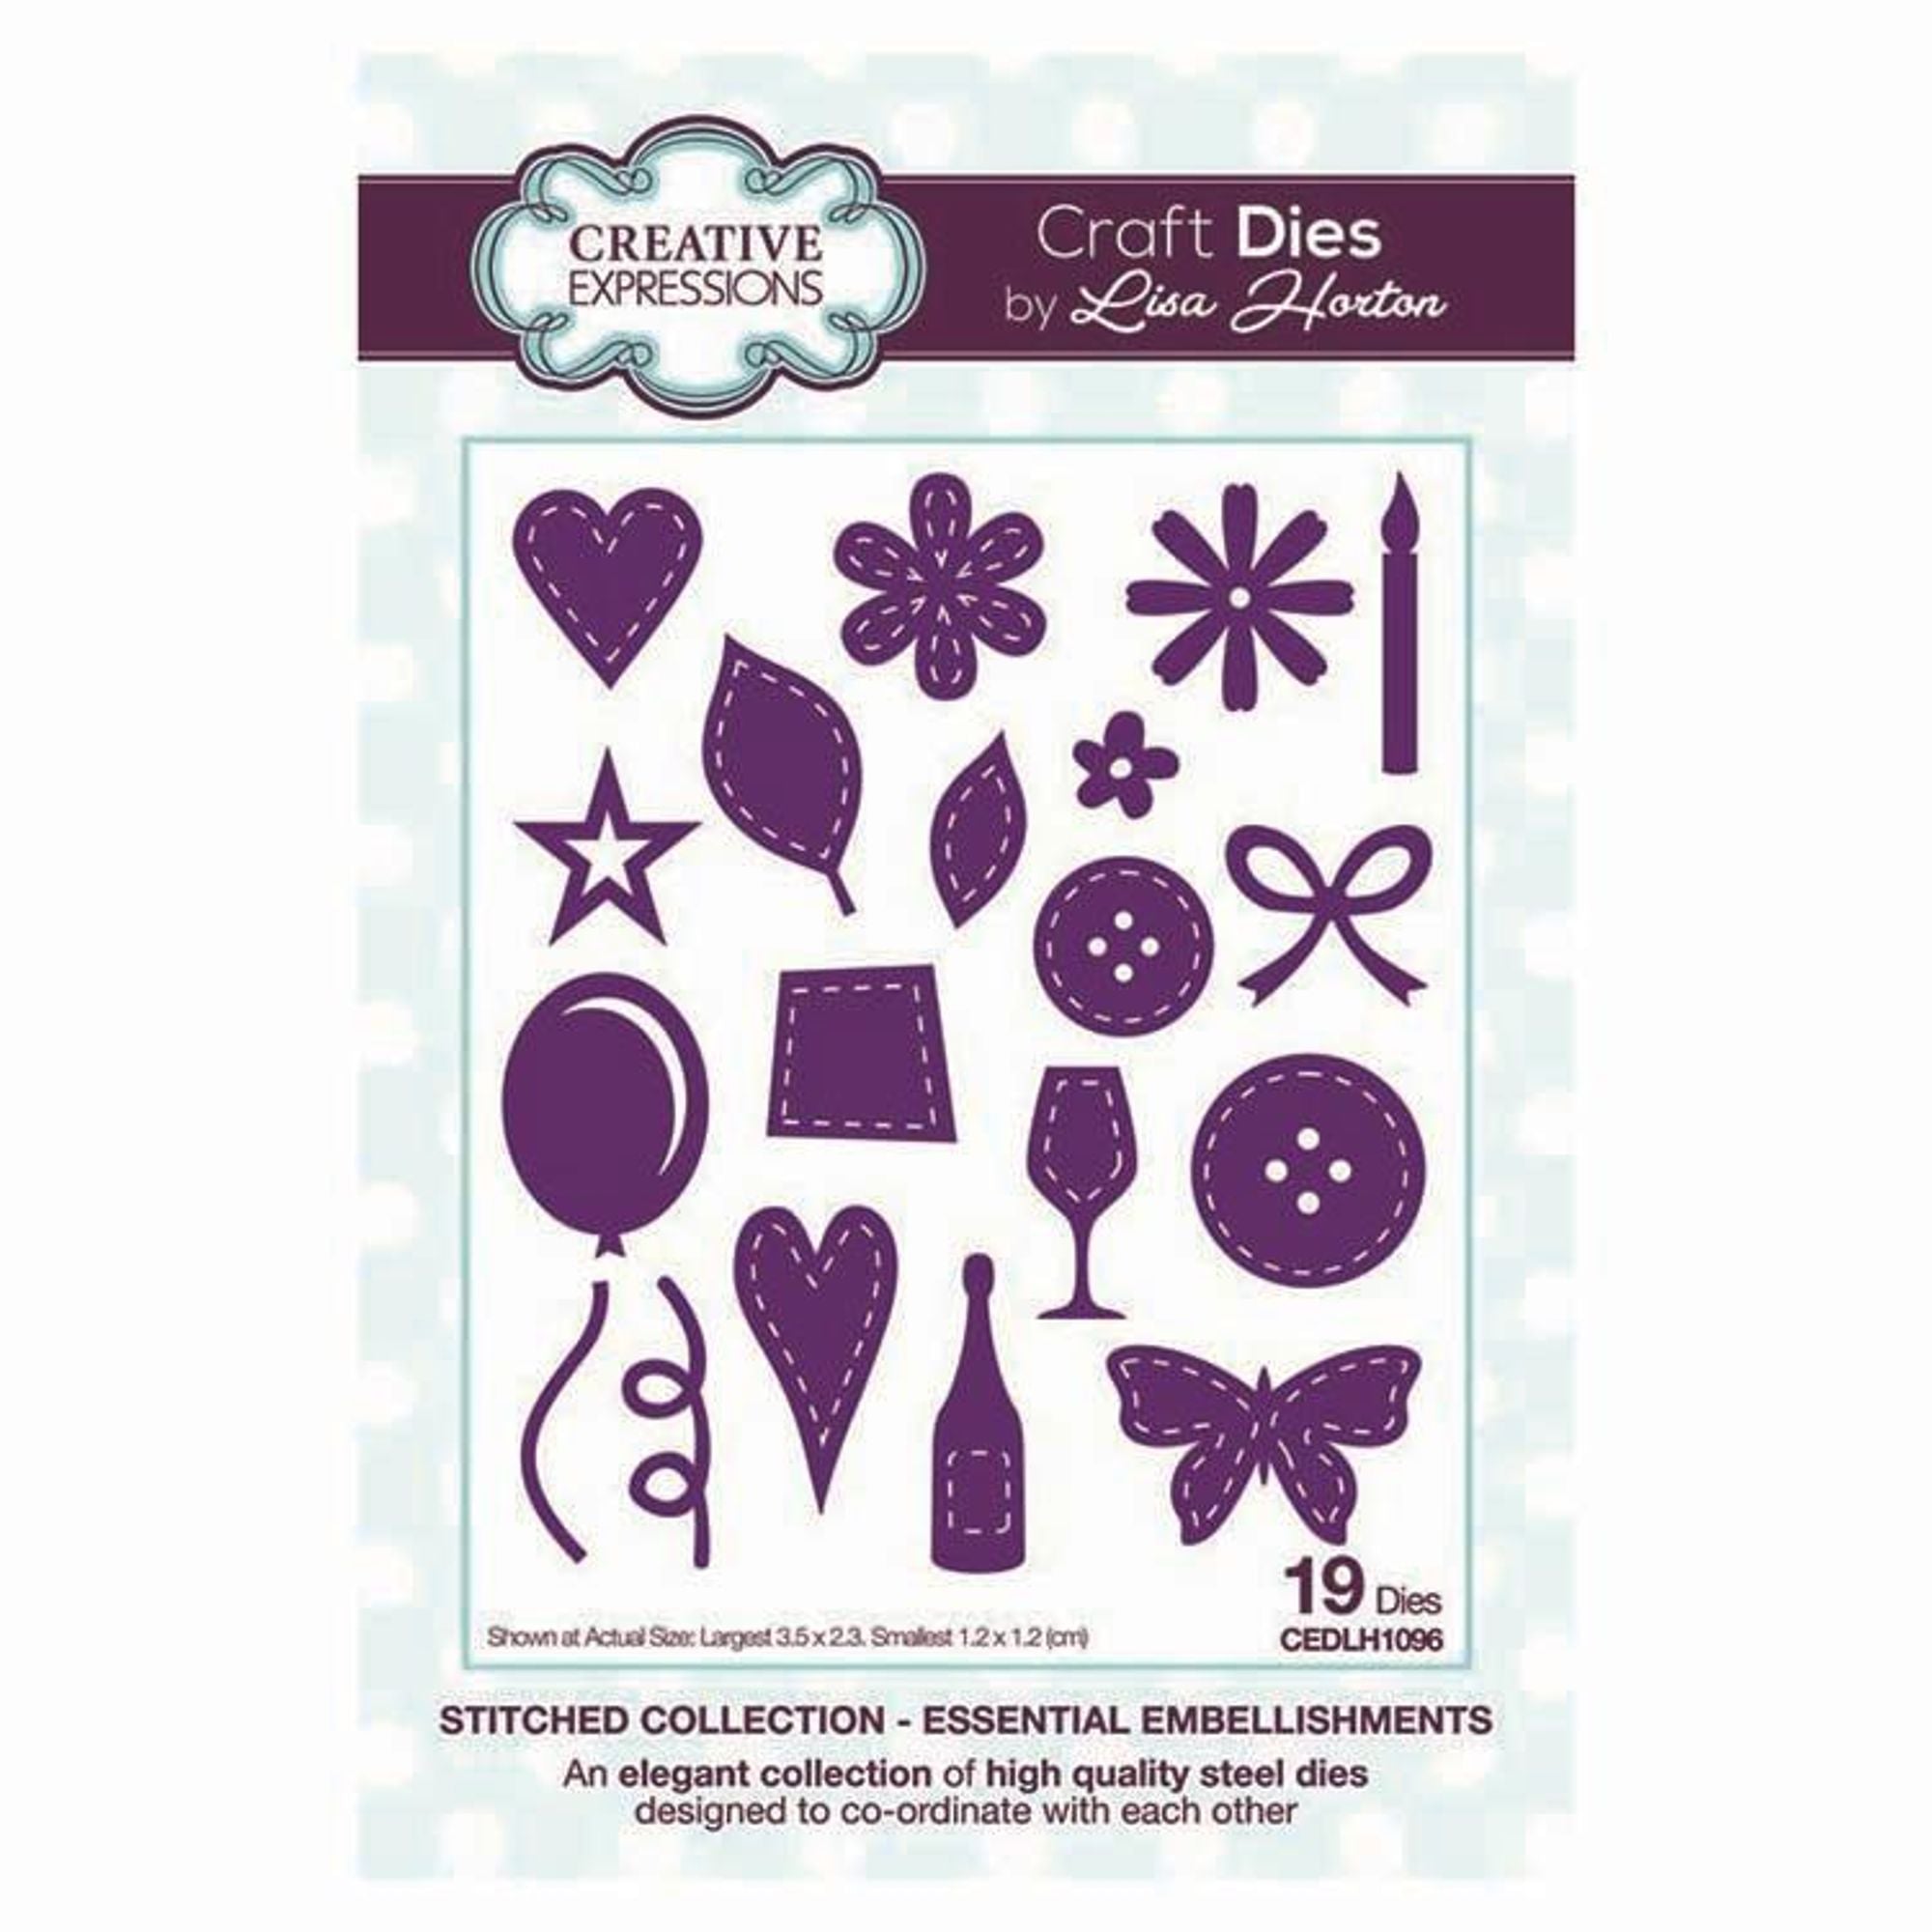 Stitched Collection Essential Embellishments Craft Die